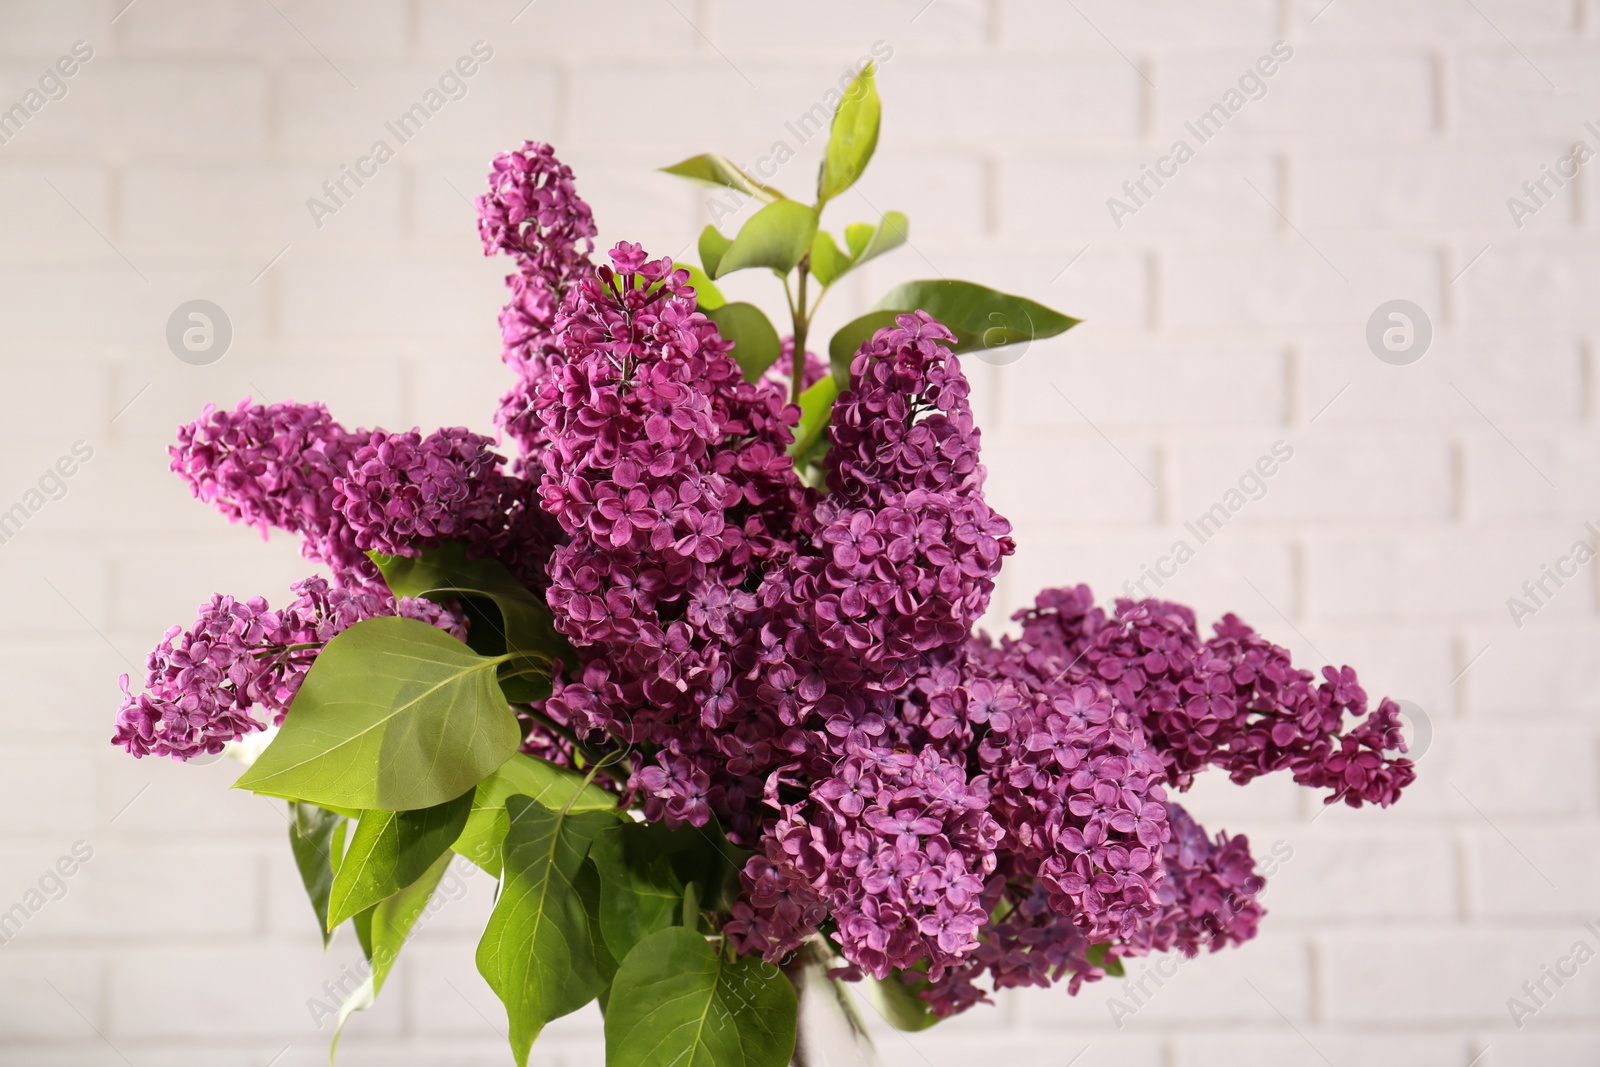 Photo of Beautiful lilac flowers against white tiled wall